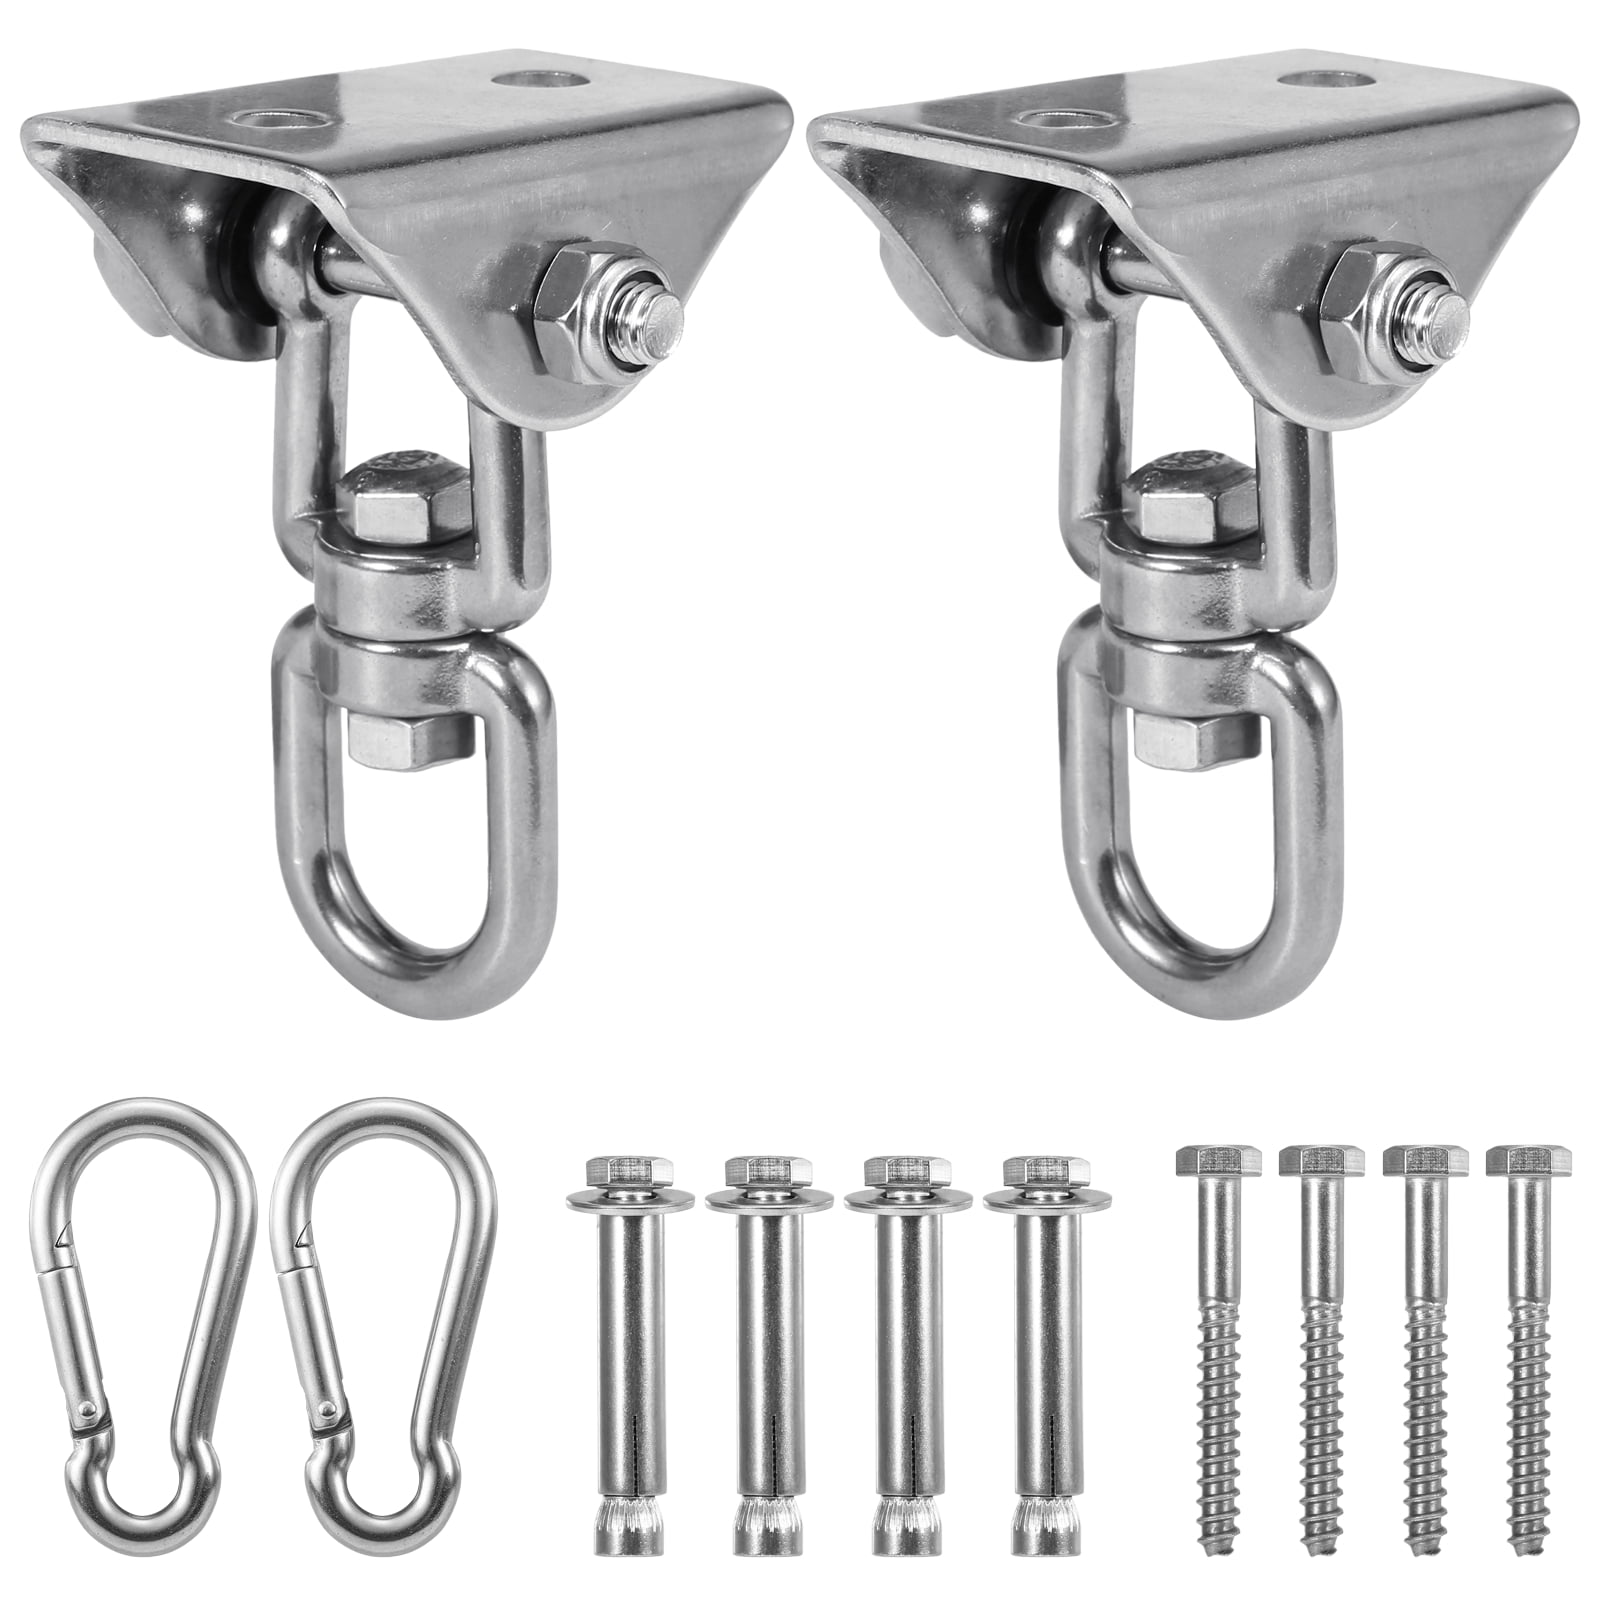 Suspension Hooks 2200LB Capacity Easy to install Heavy Duty 304 Stainless Steel Swing Hangers 360 Degree Rotation Ceiling Wall Mount Swing Hooks for Playground Porch Yoga Seat Chairs Sandbag Swing d 